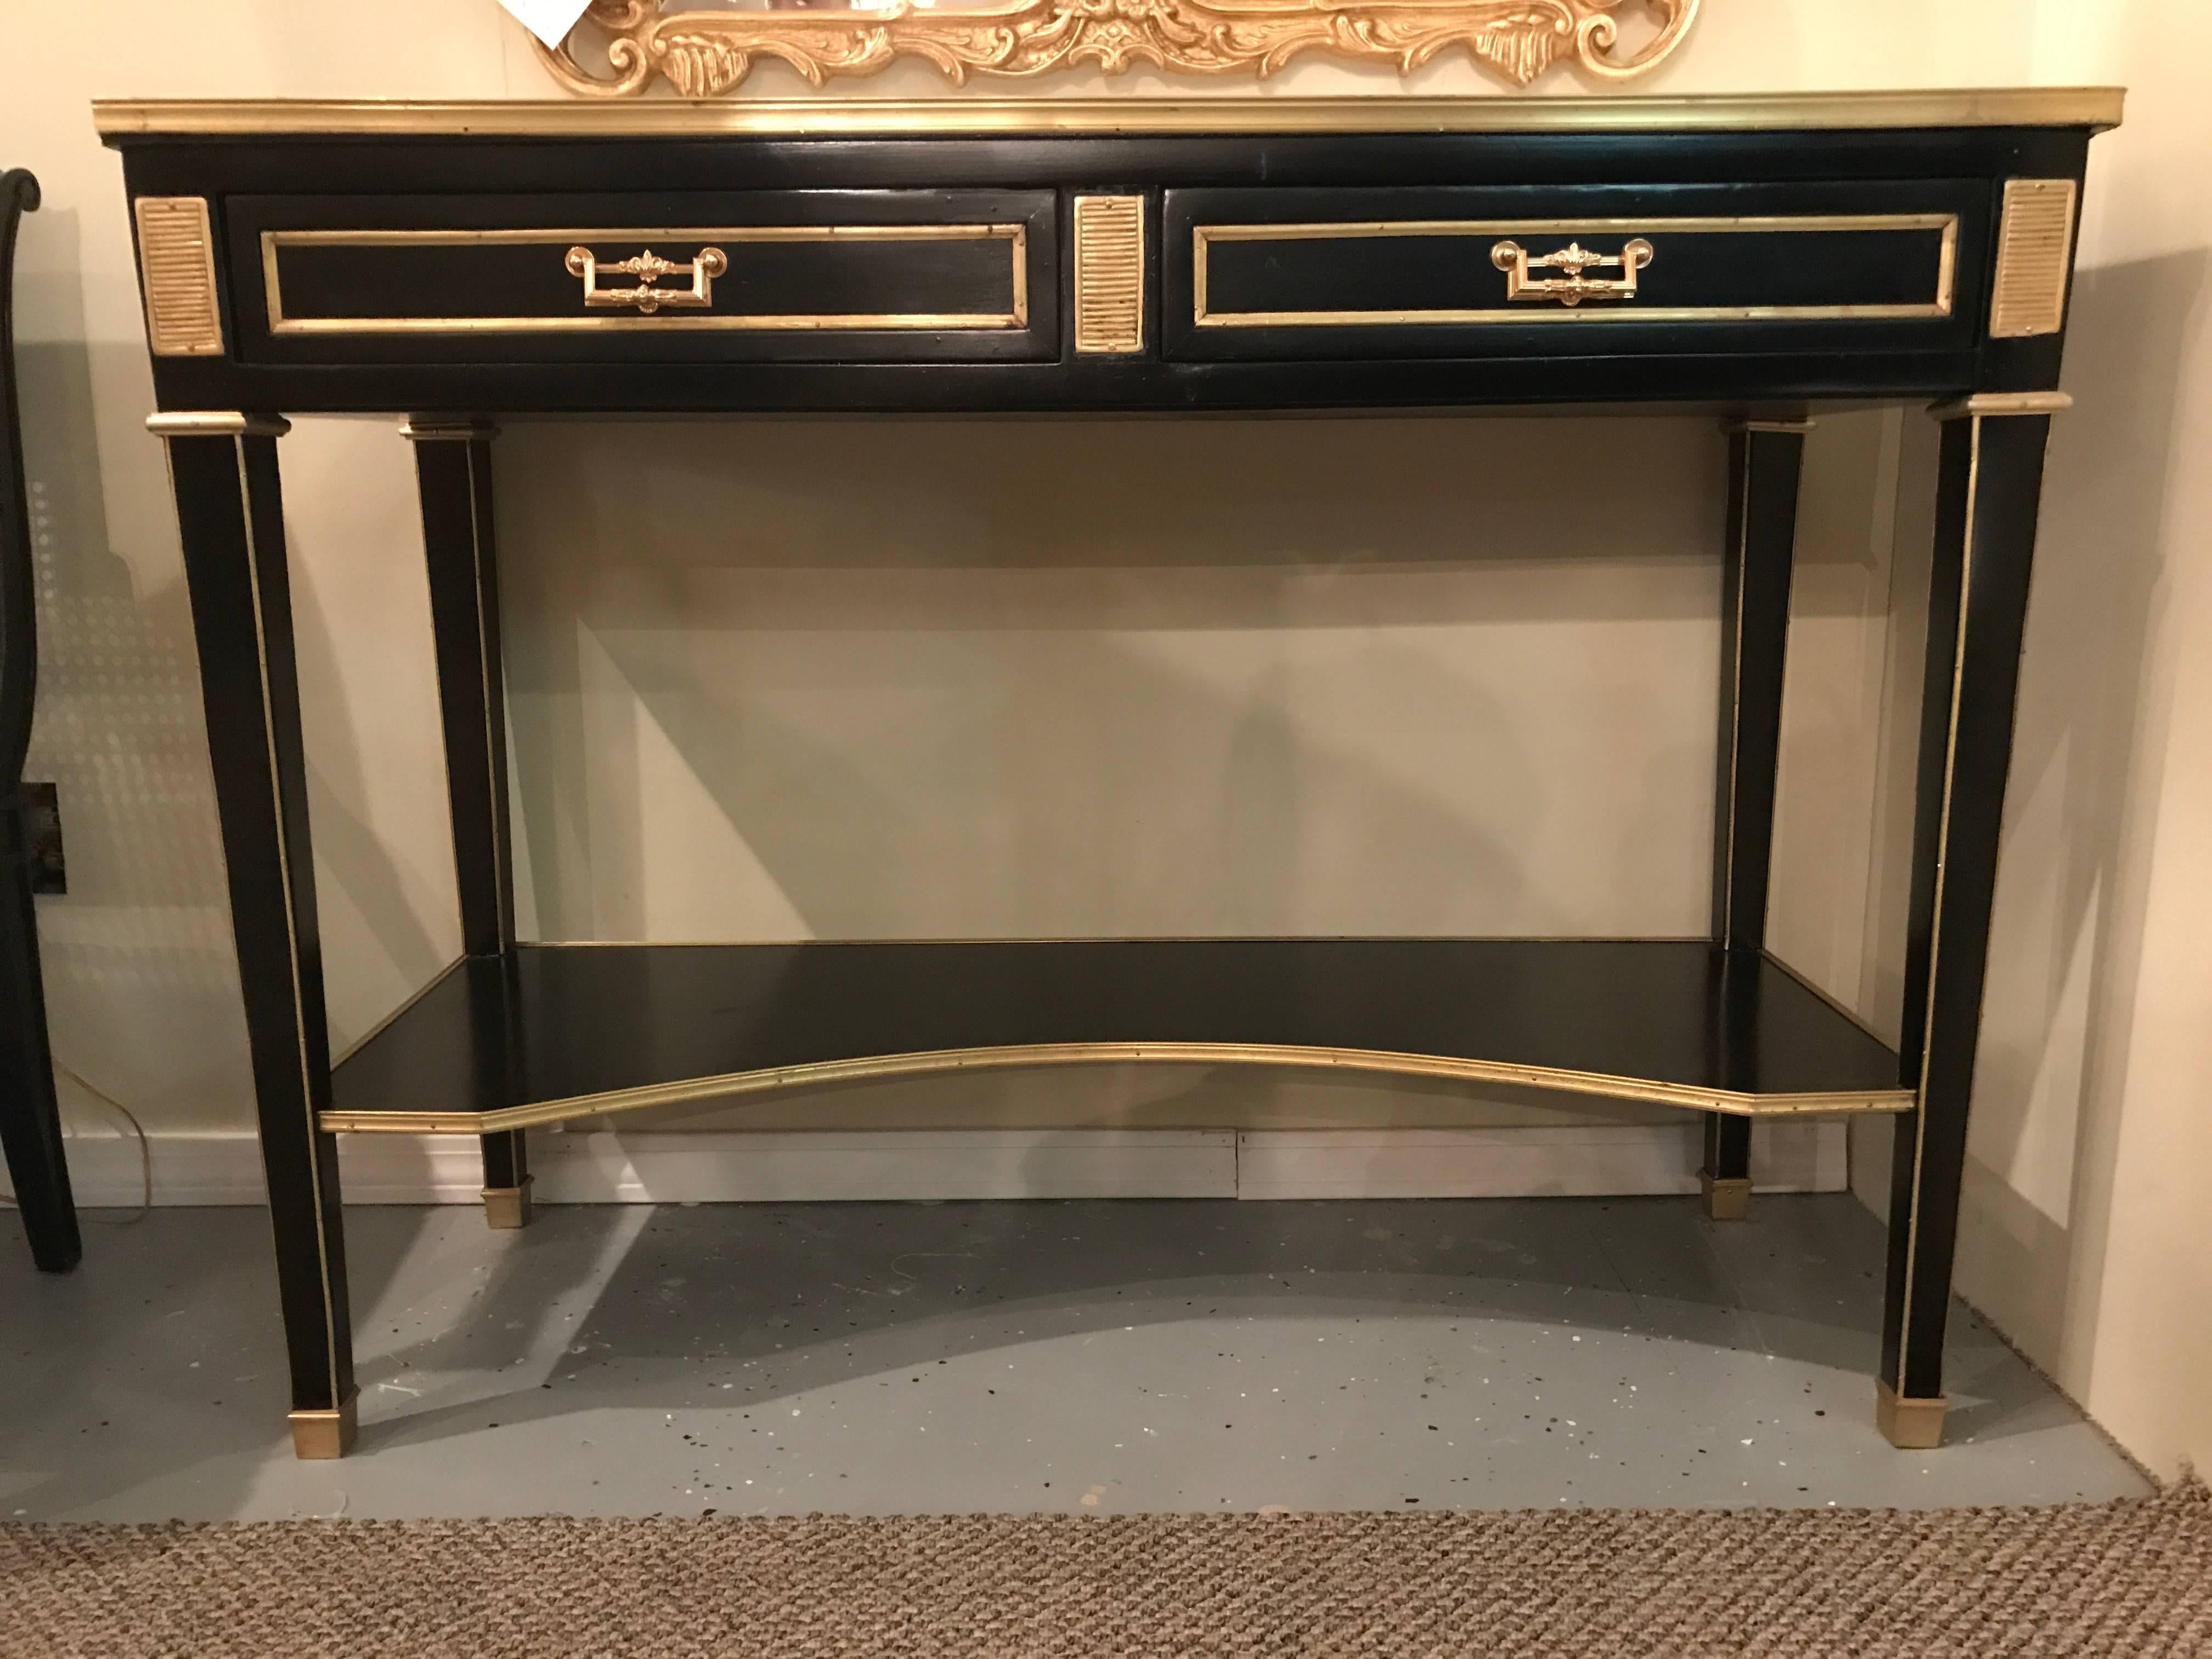 A pair of Jansen style ebonized two drawer bronze-mounted marble-top console tables. These wonderfully Russian neoclassical inspired consoles have a white and gray veined bronze galleried marble top above a pair of bronze famed drawers. The center